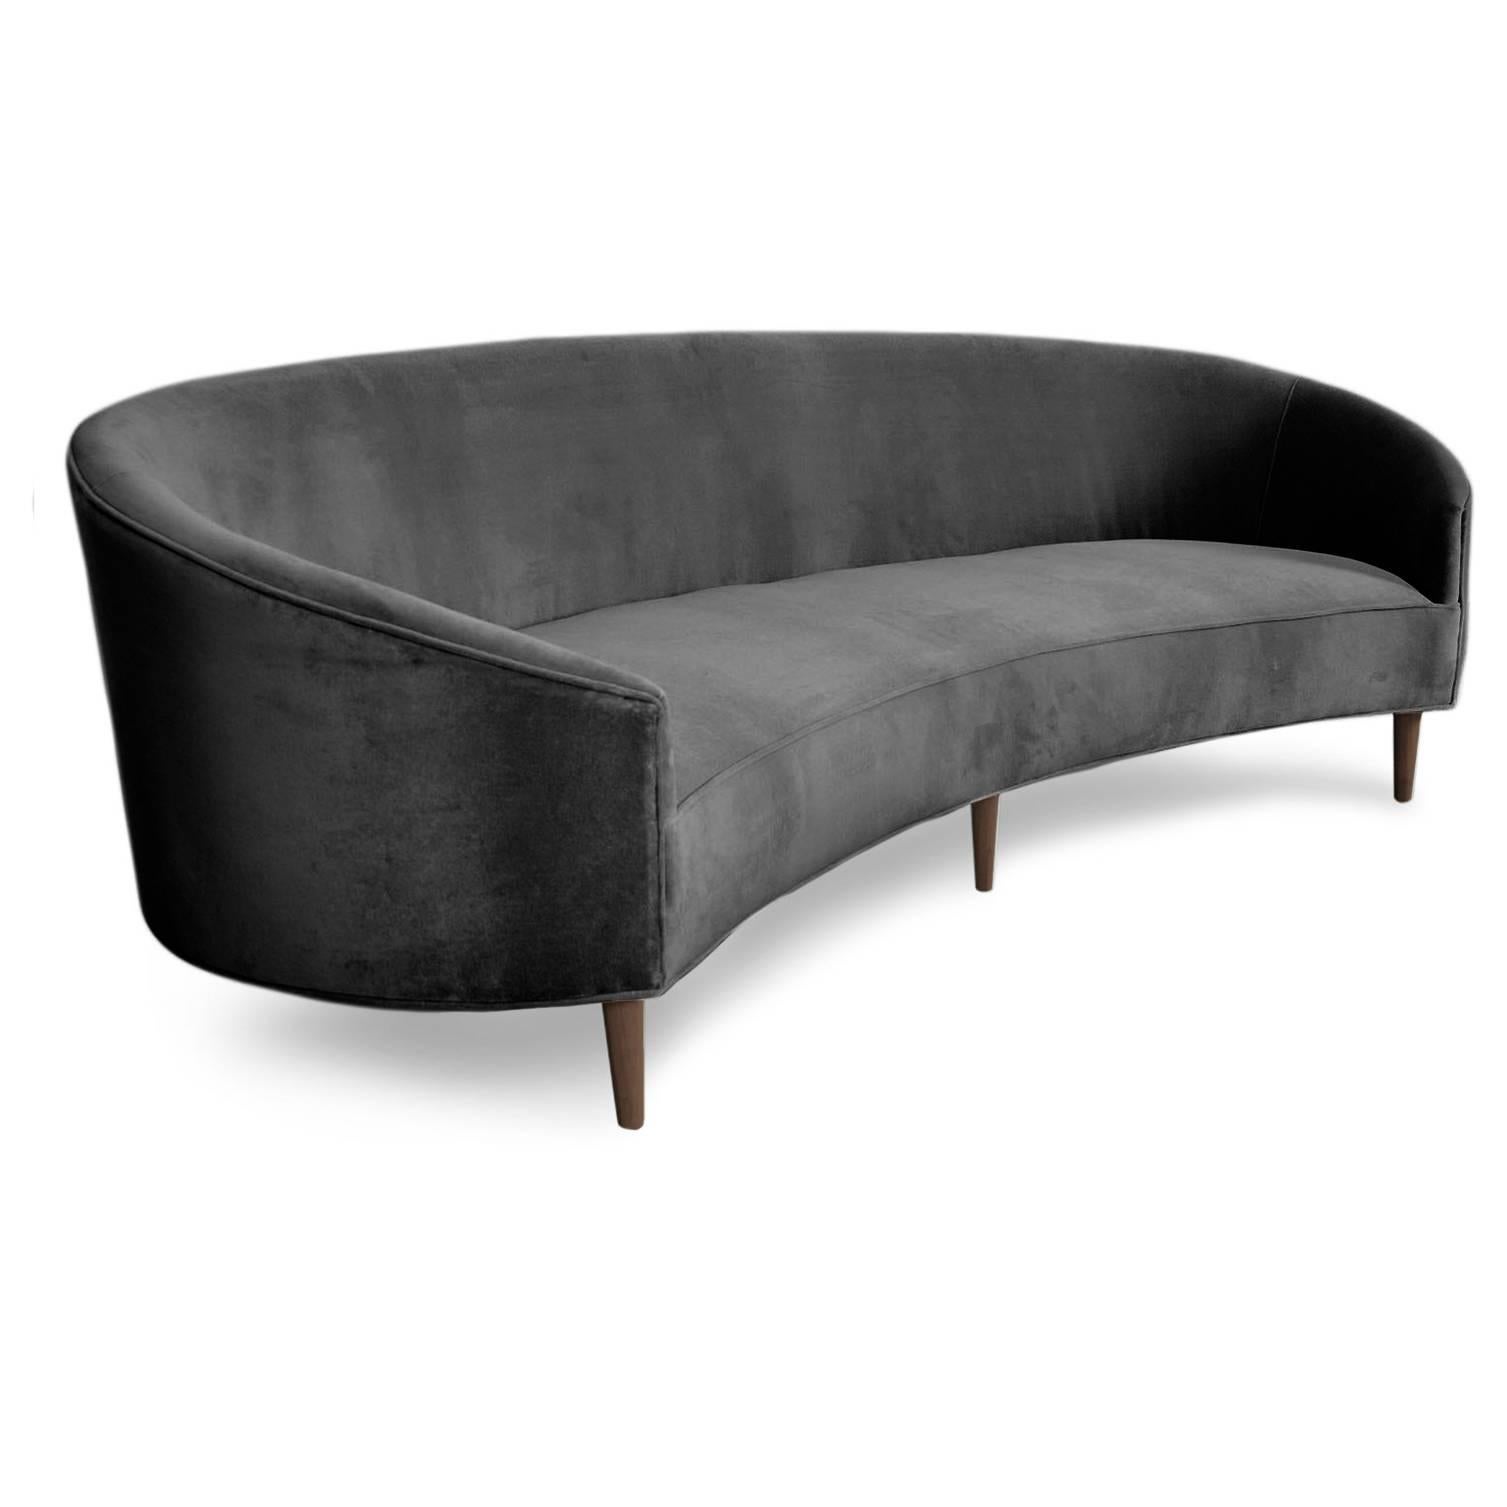 With Classic clean lines and sharp curves comes this Art Deco sofa. Uniquely shaped, similar to a crescent, curved in arms and six walnut cone legs put together in elegance. Shown in Charcoal velvet.

Measures: 105